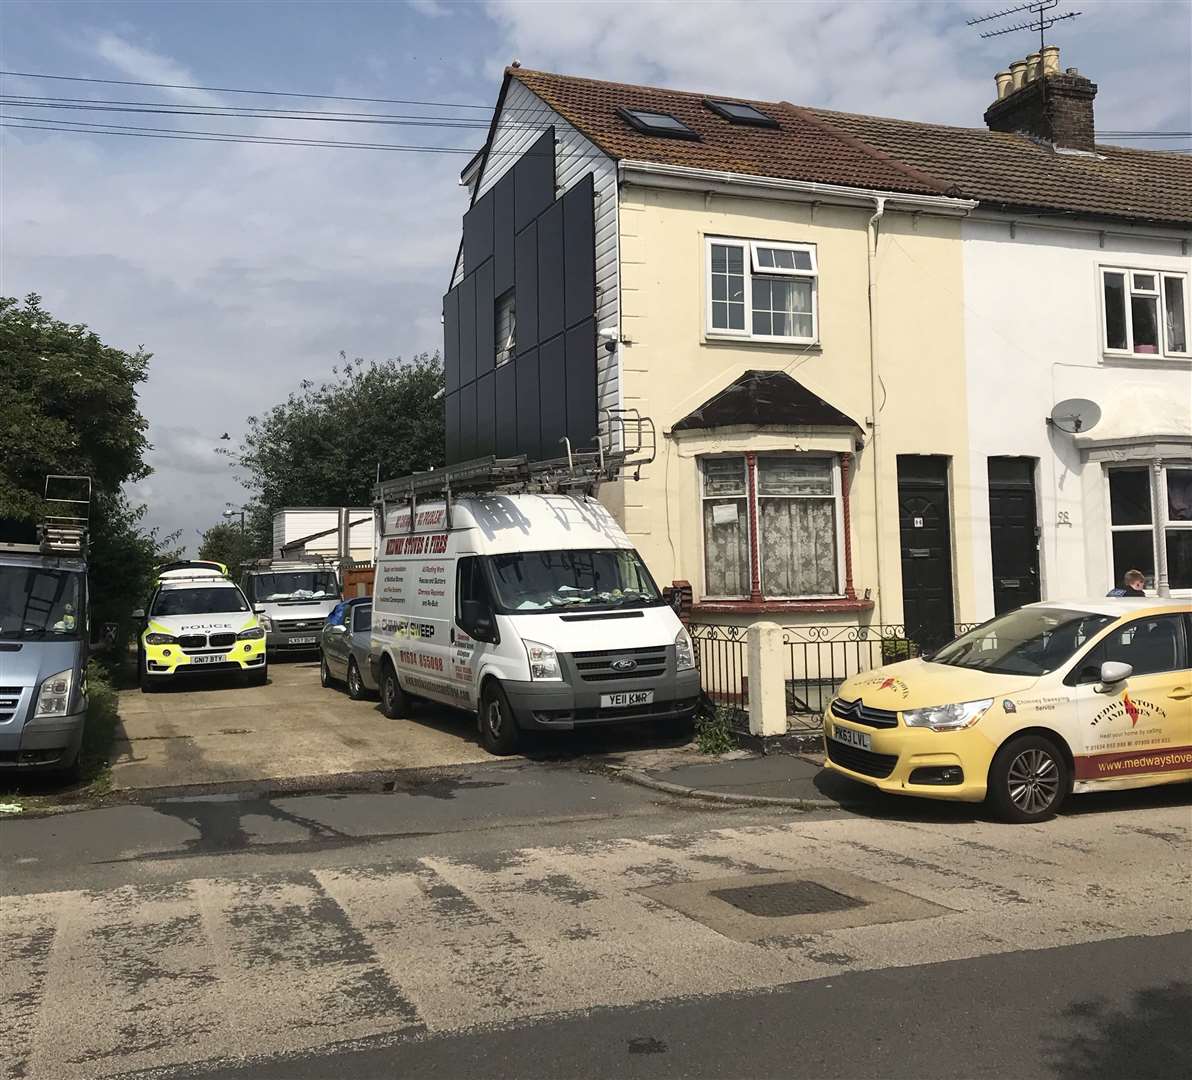 Police have been seen entering a home in Ingram Road